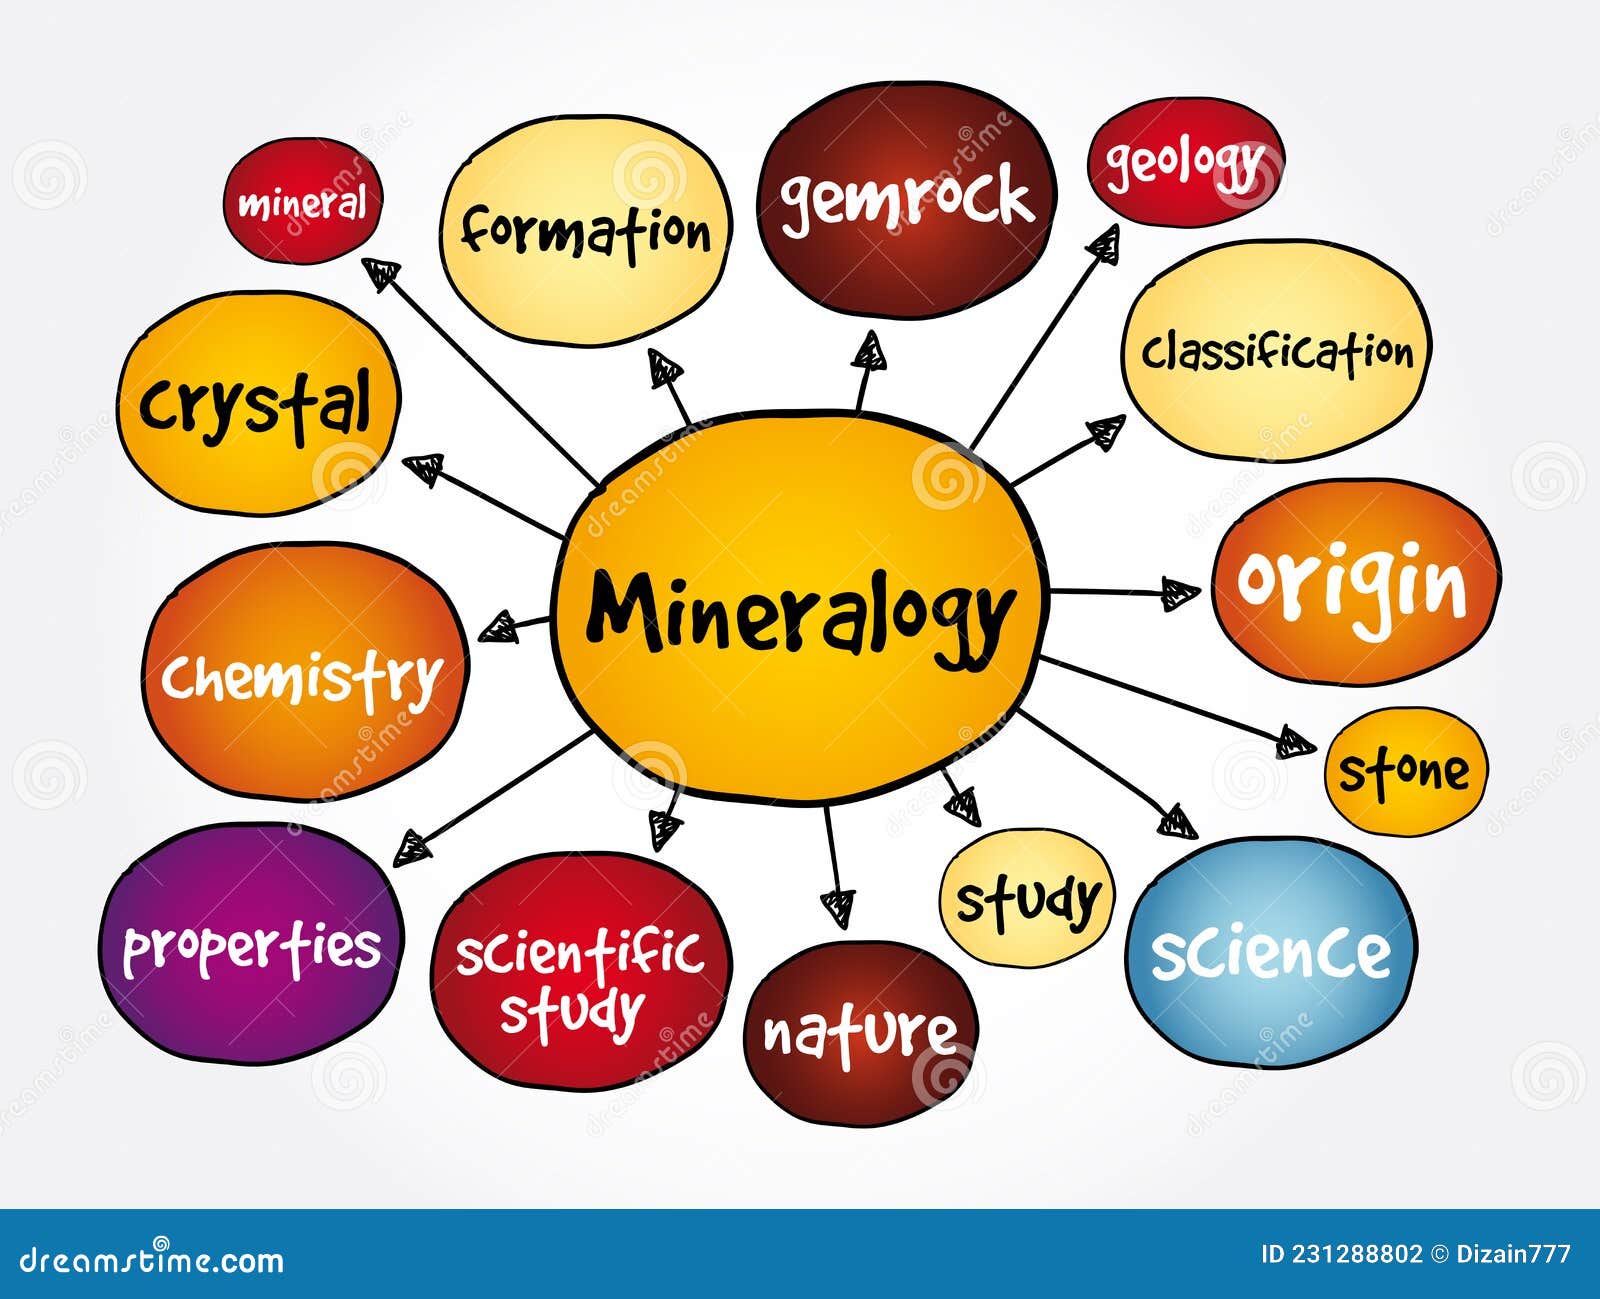 mineralogy mind map, concept for presentations and reports